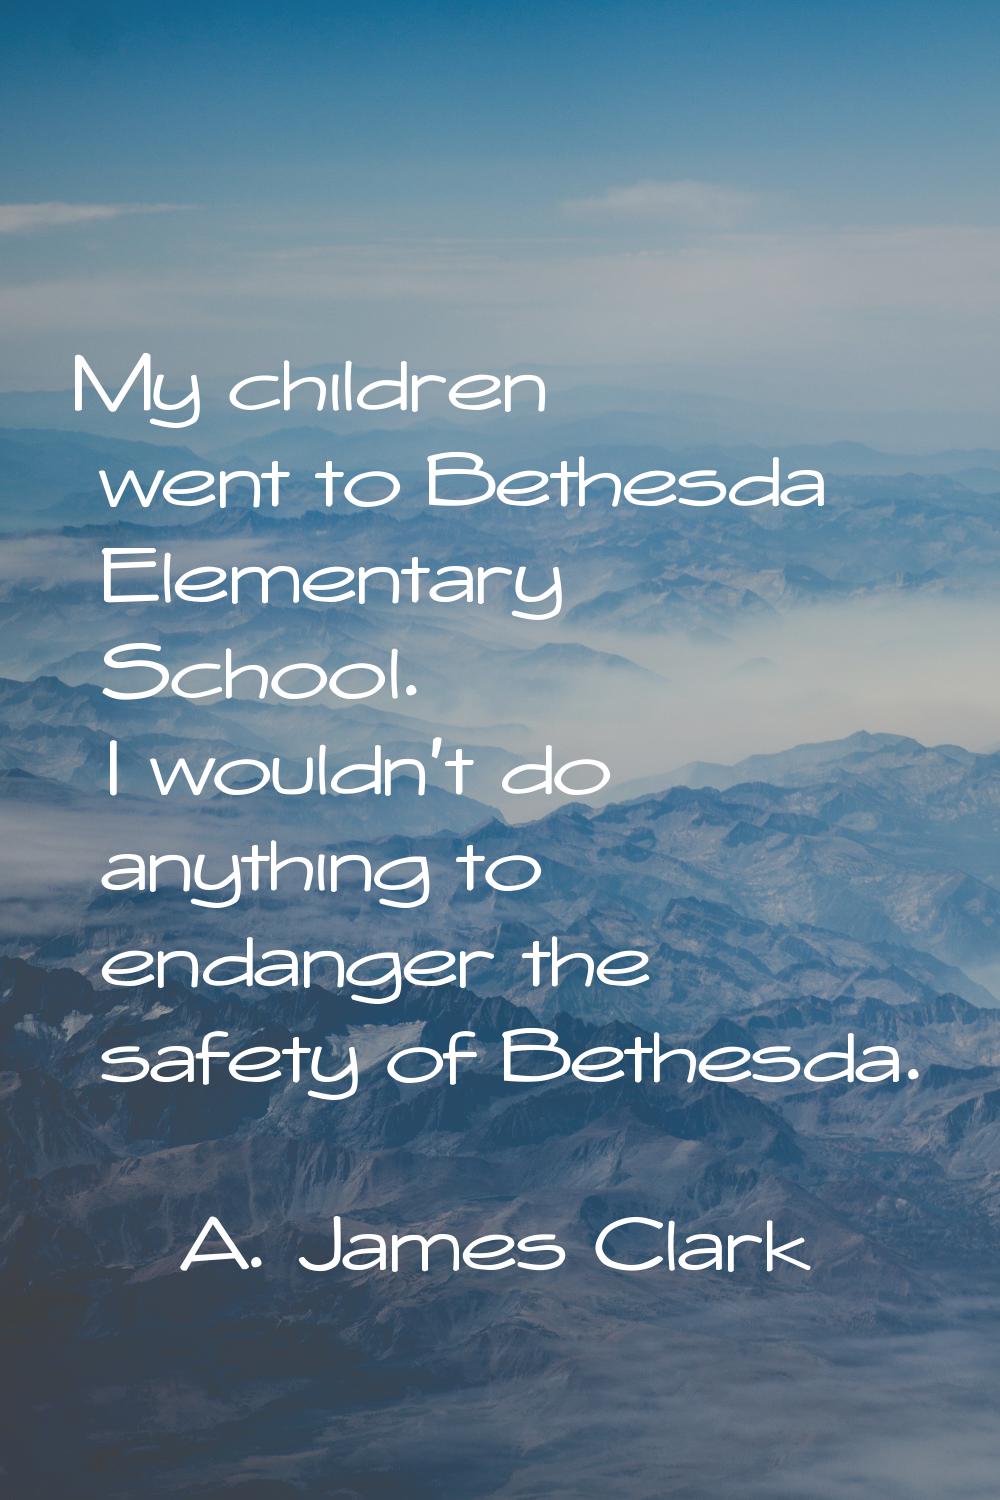 My children went to Bethesda Elementary School. I wouldn't do anything to endanger the safety of Be